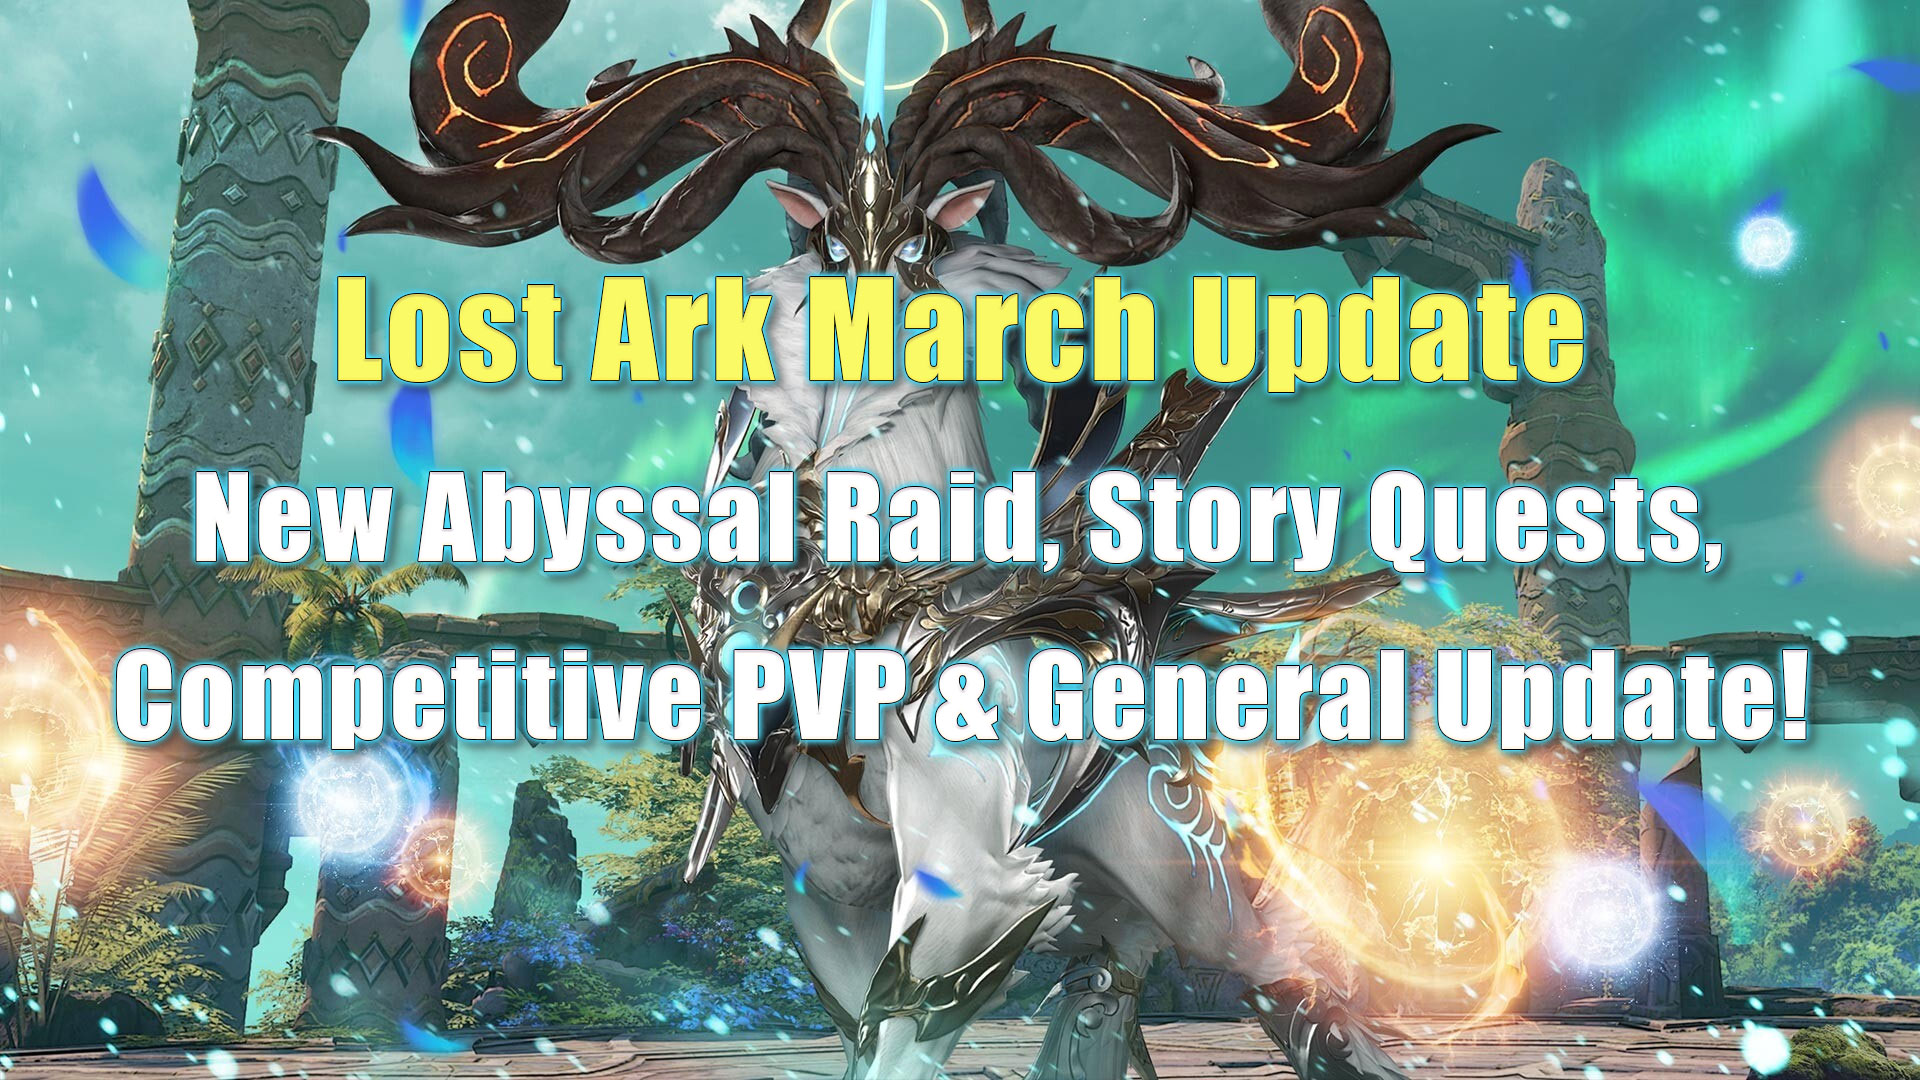 Lost Ark March Update- New Abyssal Raid, Story Quests, Competitive PVP & General Update!